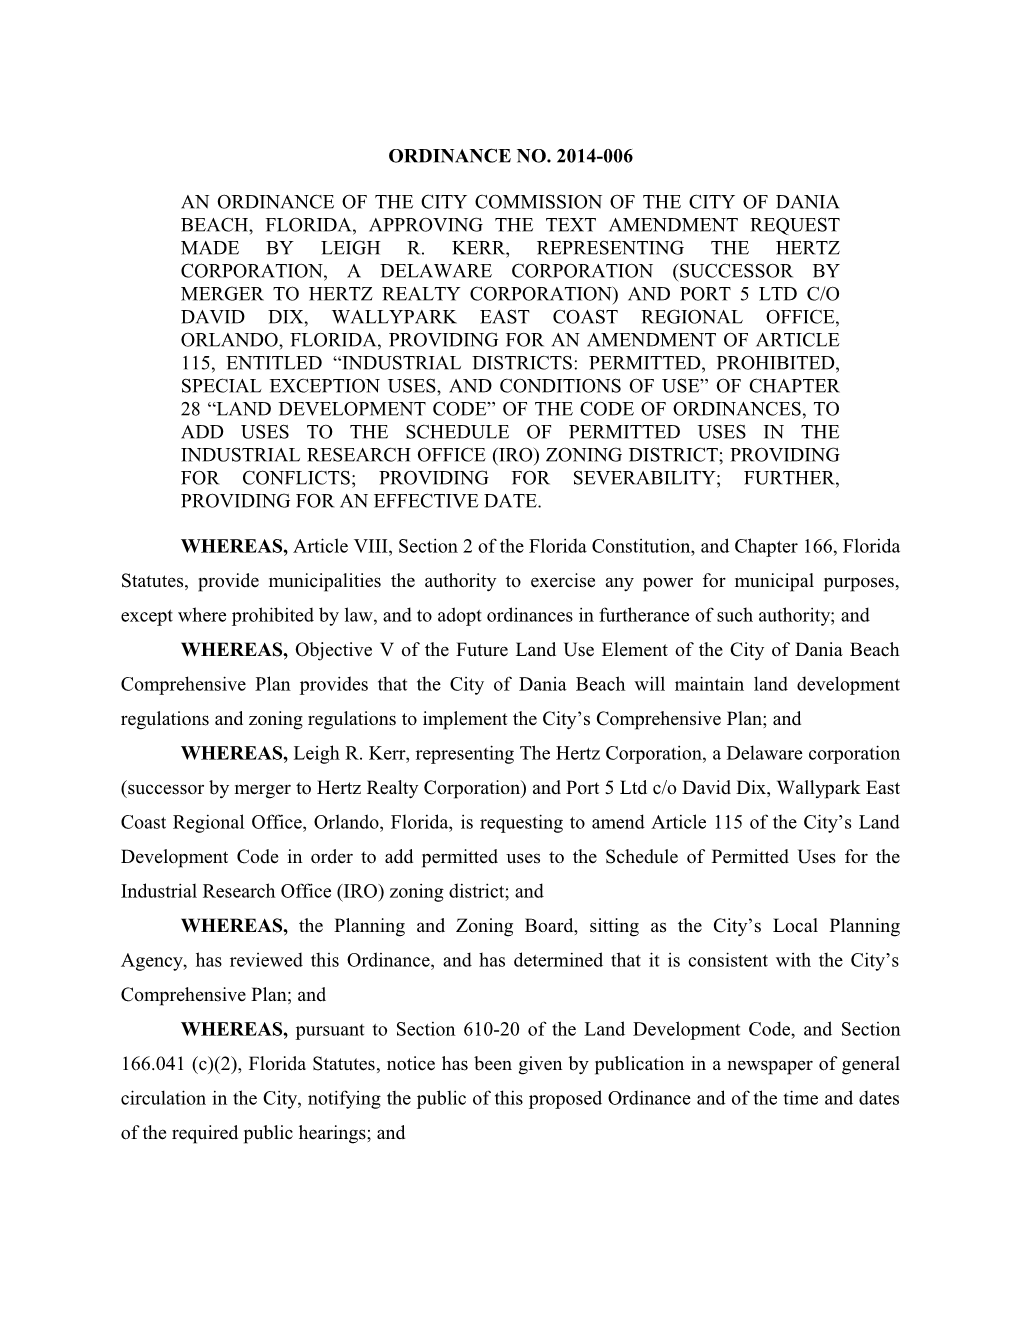 An Ordinance of the City Commission of the City of Dania Beach, Florida, Approving The